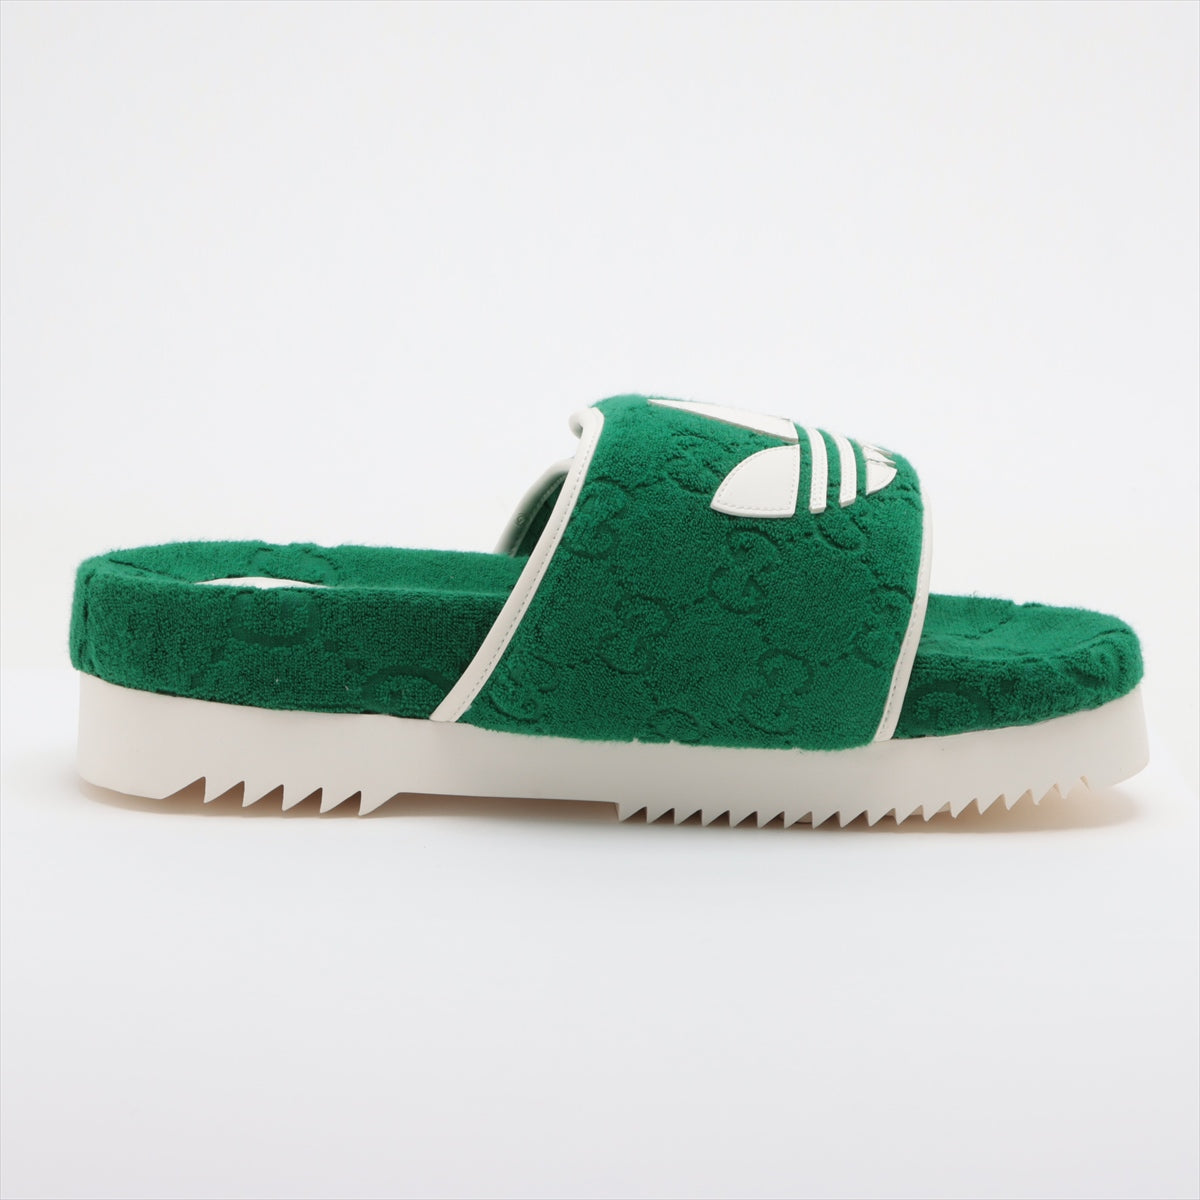 Gucci x adidas Cotton & leather Sandals Unknown size Men's Green